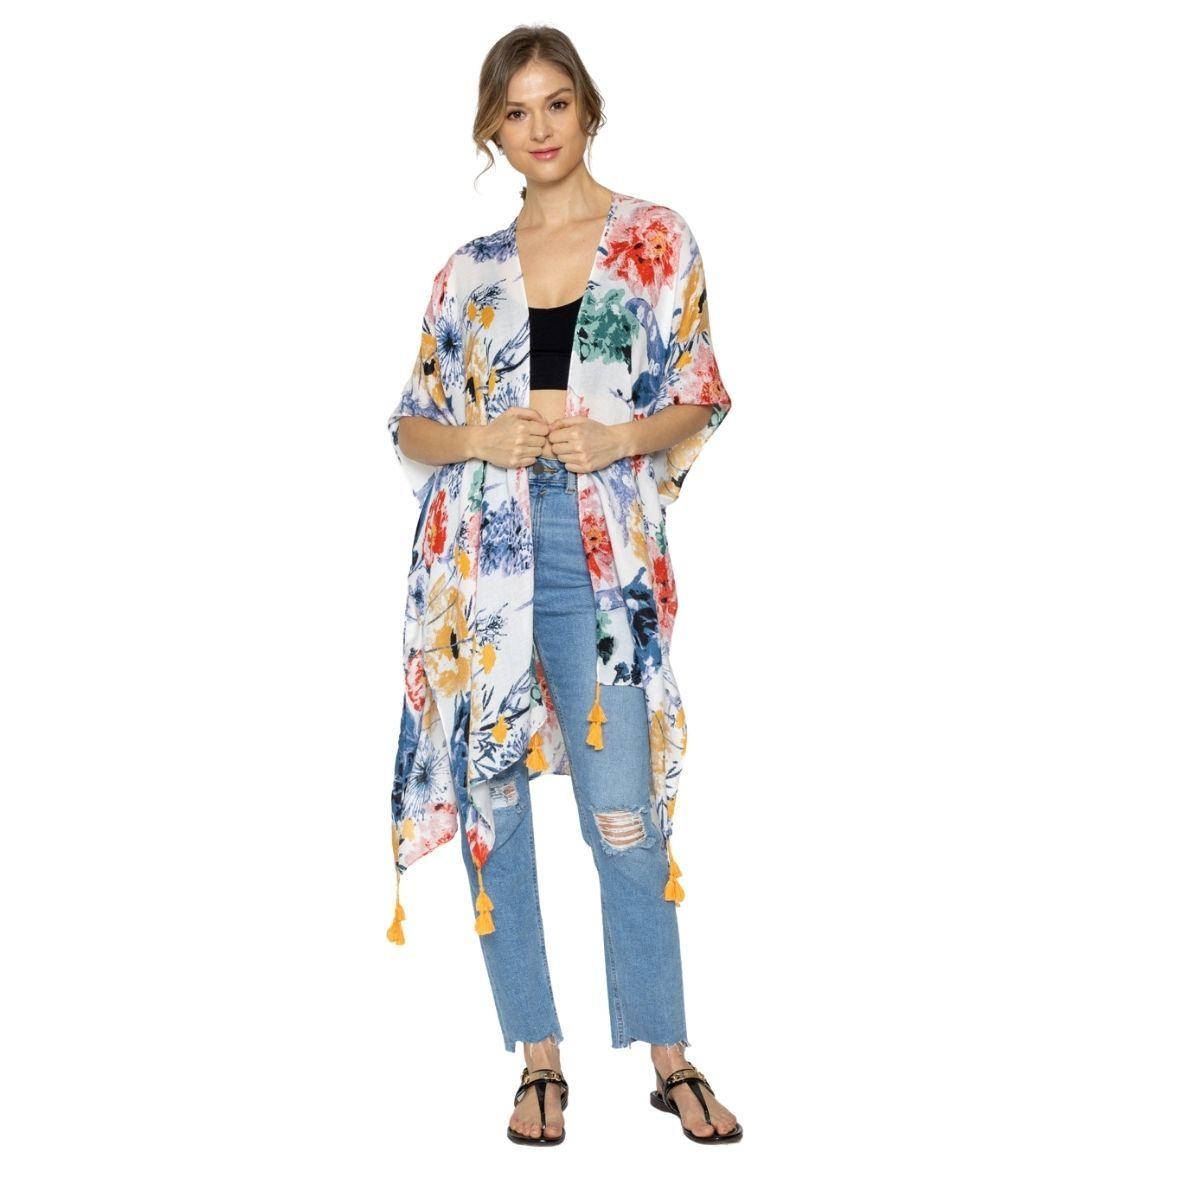 Get Noticed with our Multicolor Floral Kimono Coverup Top